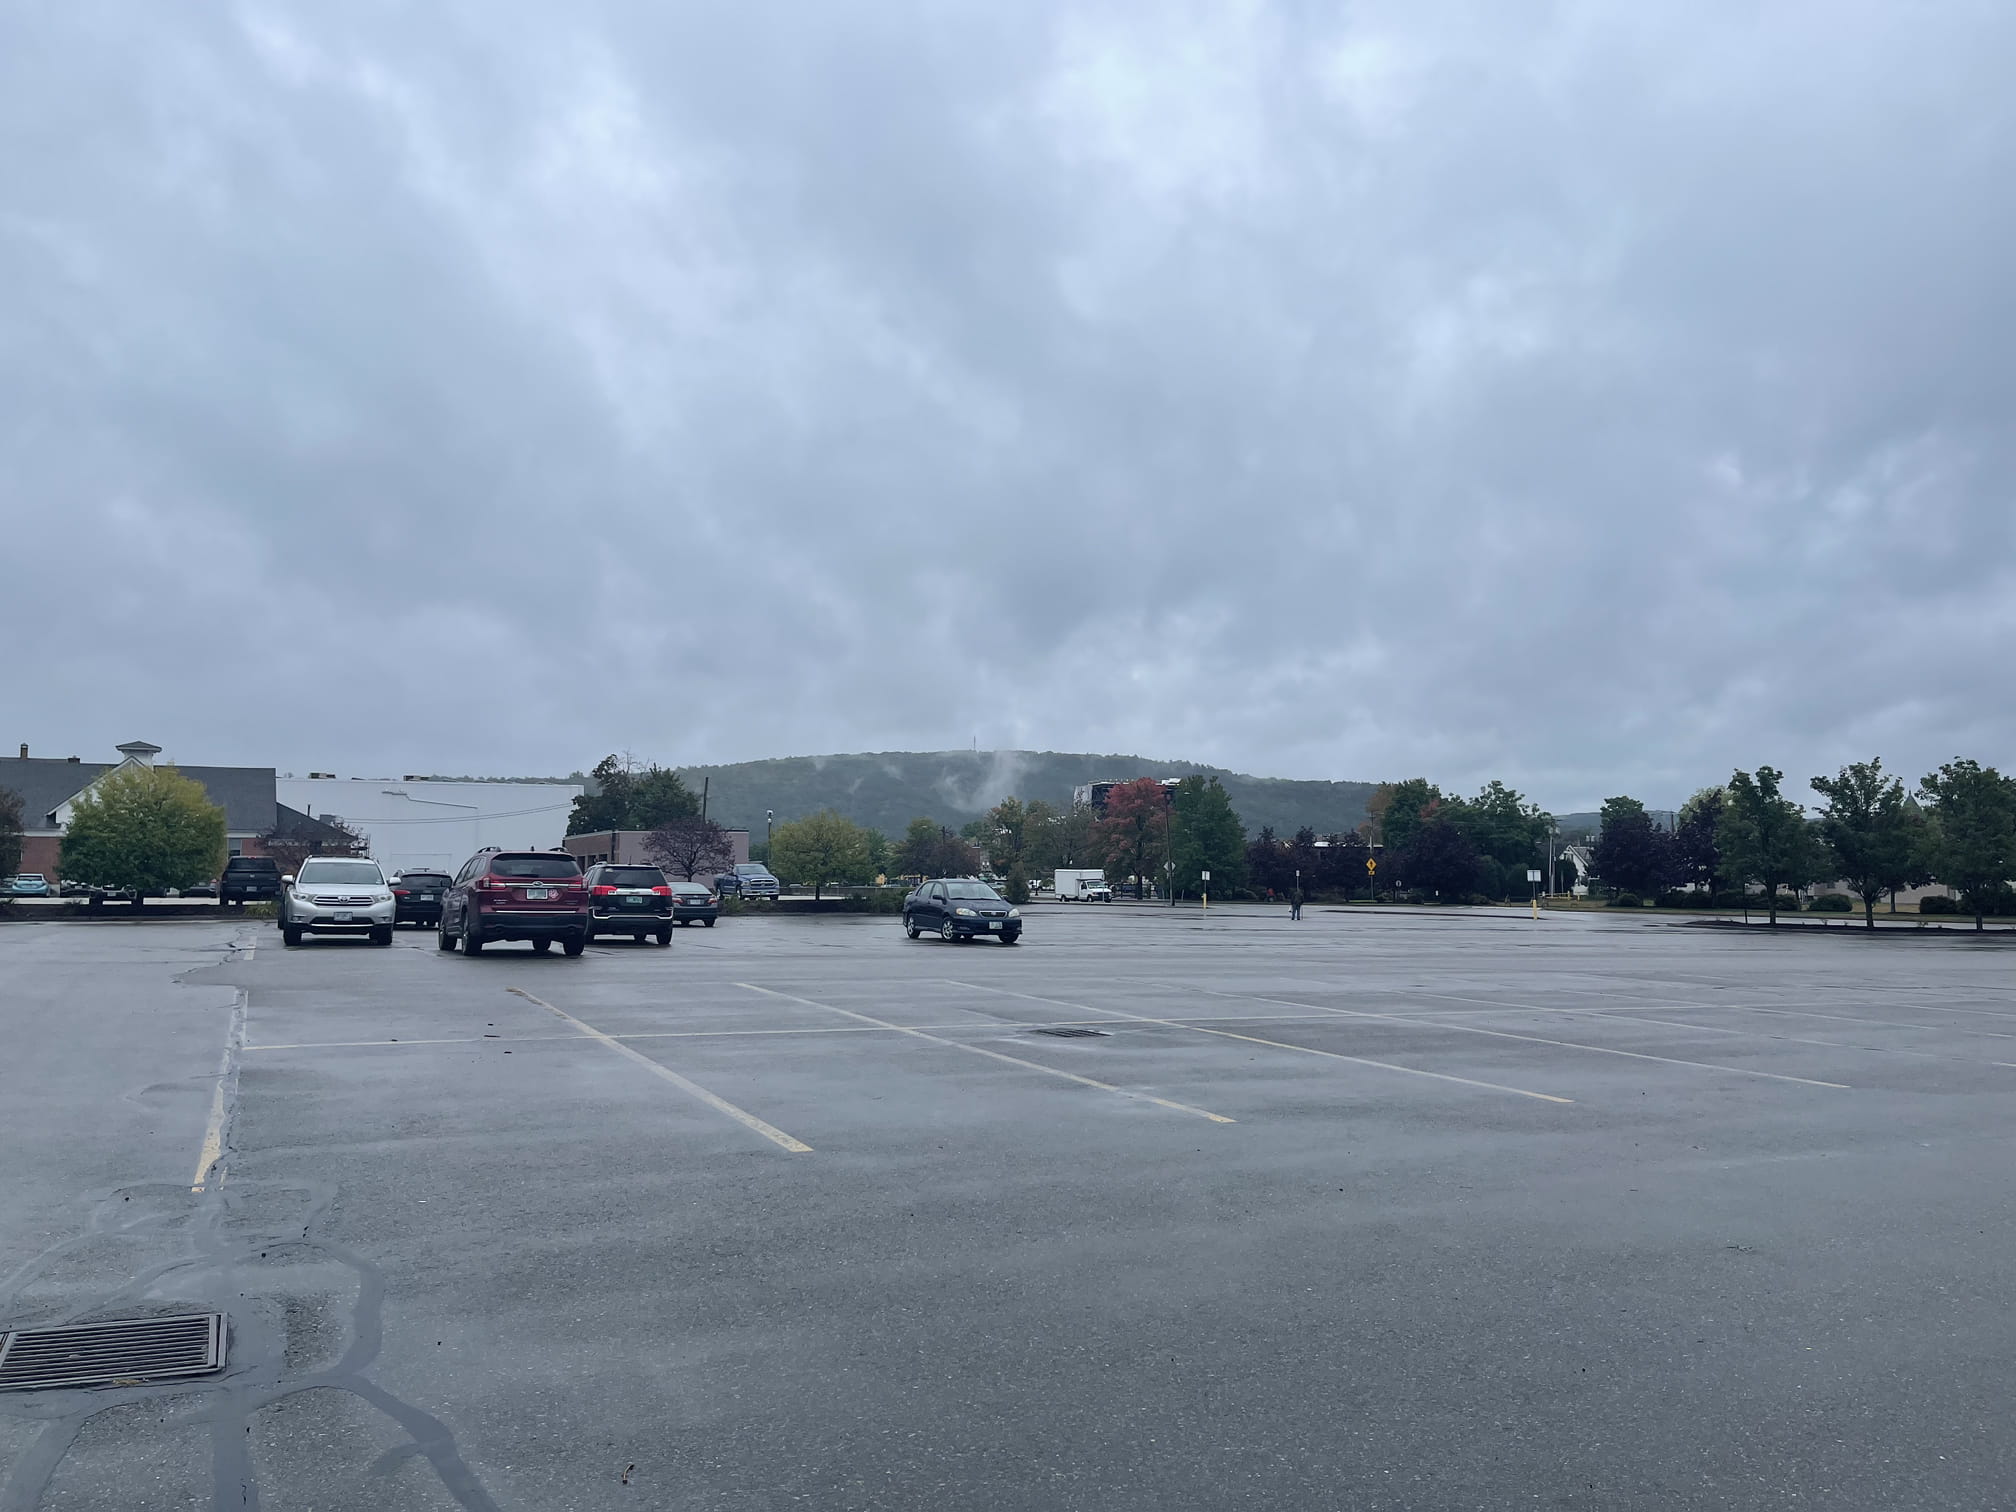 Parking lot in keene new hampshire. Mountains in the distance